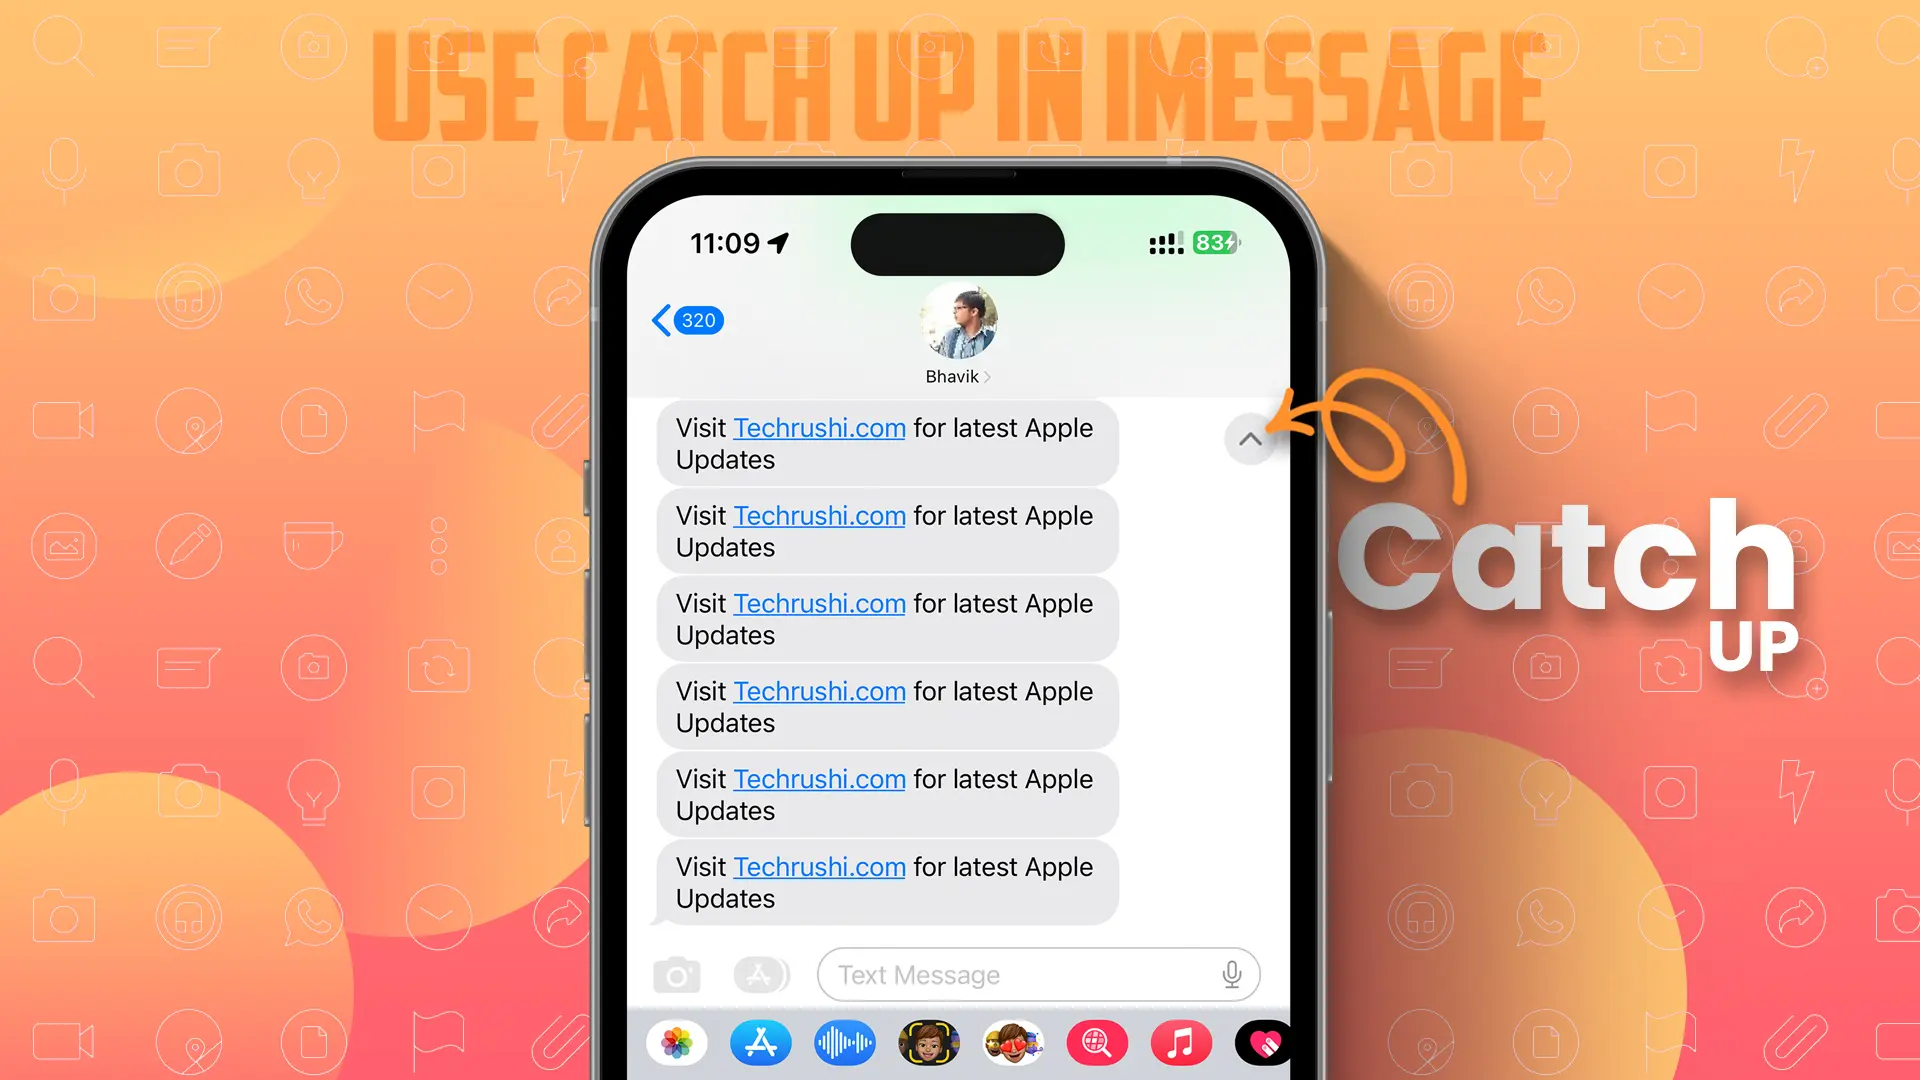 How to Catch Up Text in iMessage on iPhone